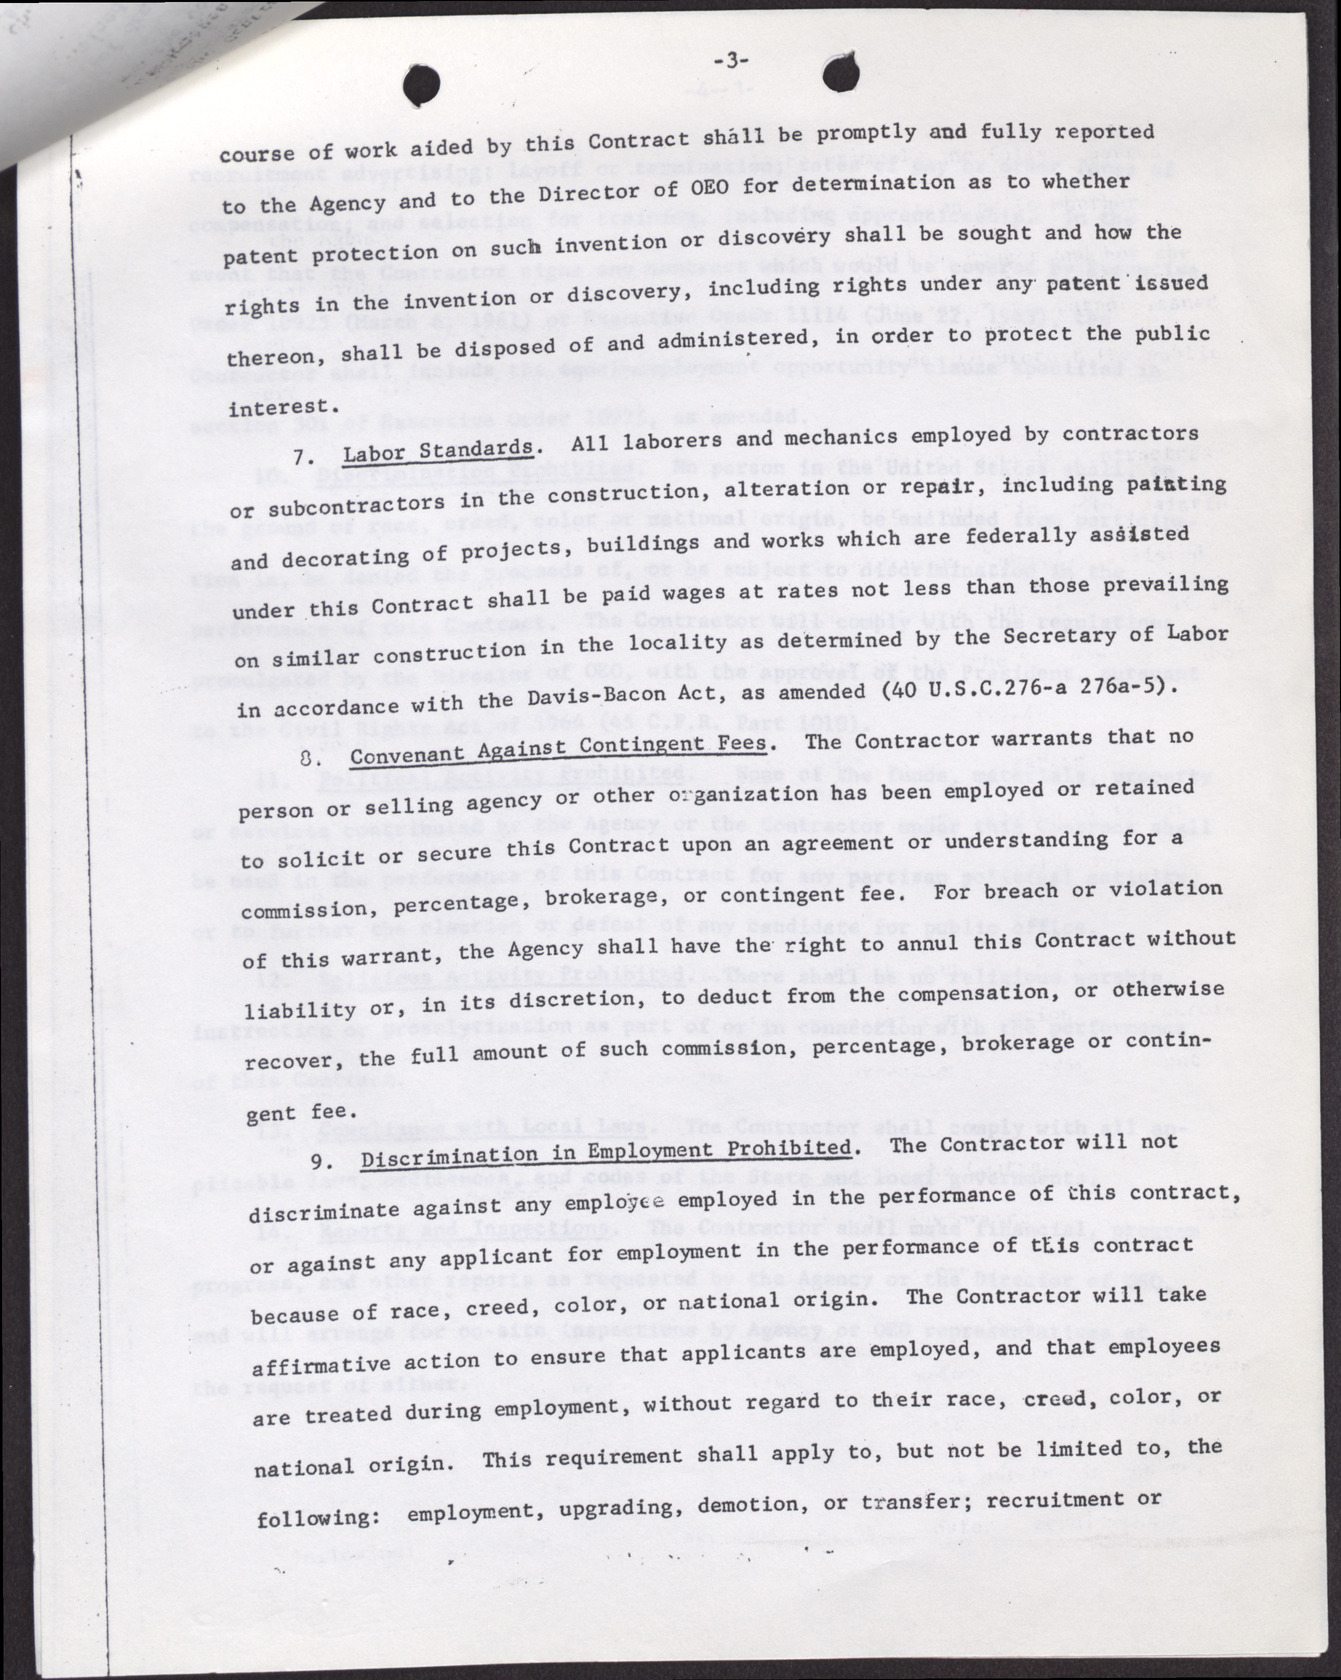 Contract of Agreement between Operation Independence and Manpower Development Center Parts I & II  (7 pages), no date, page 6